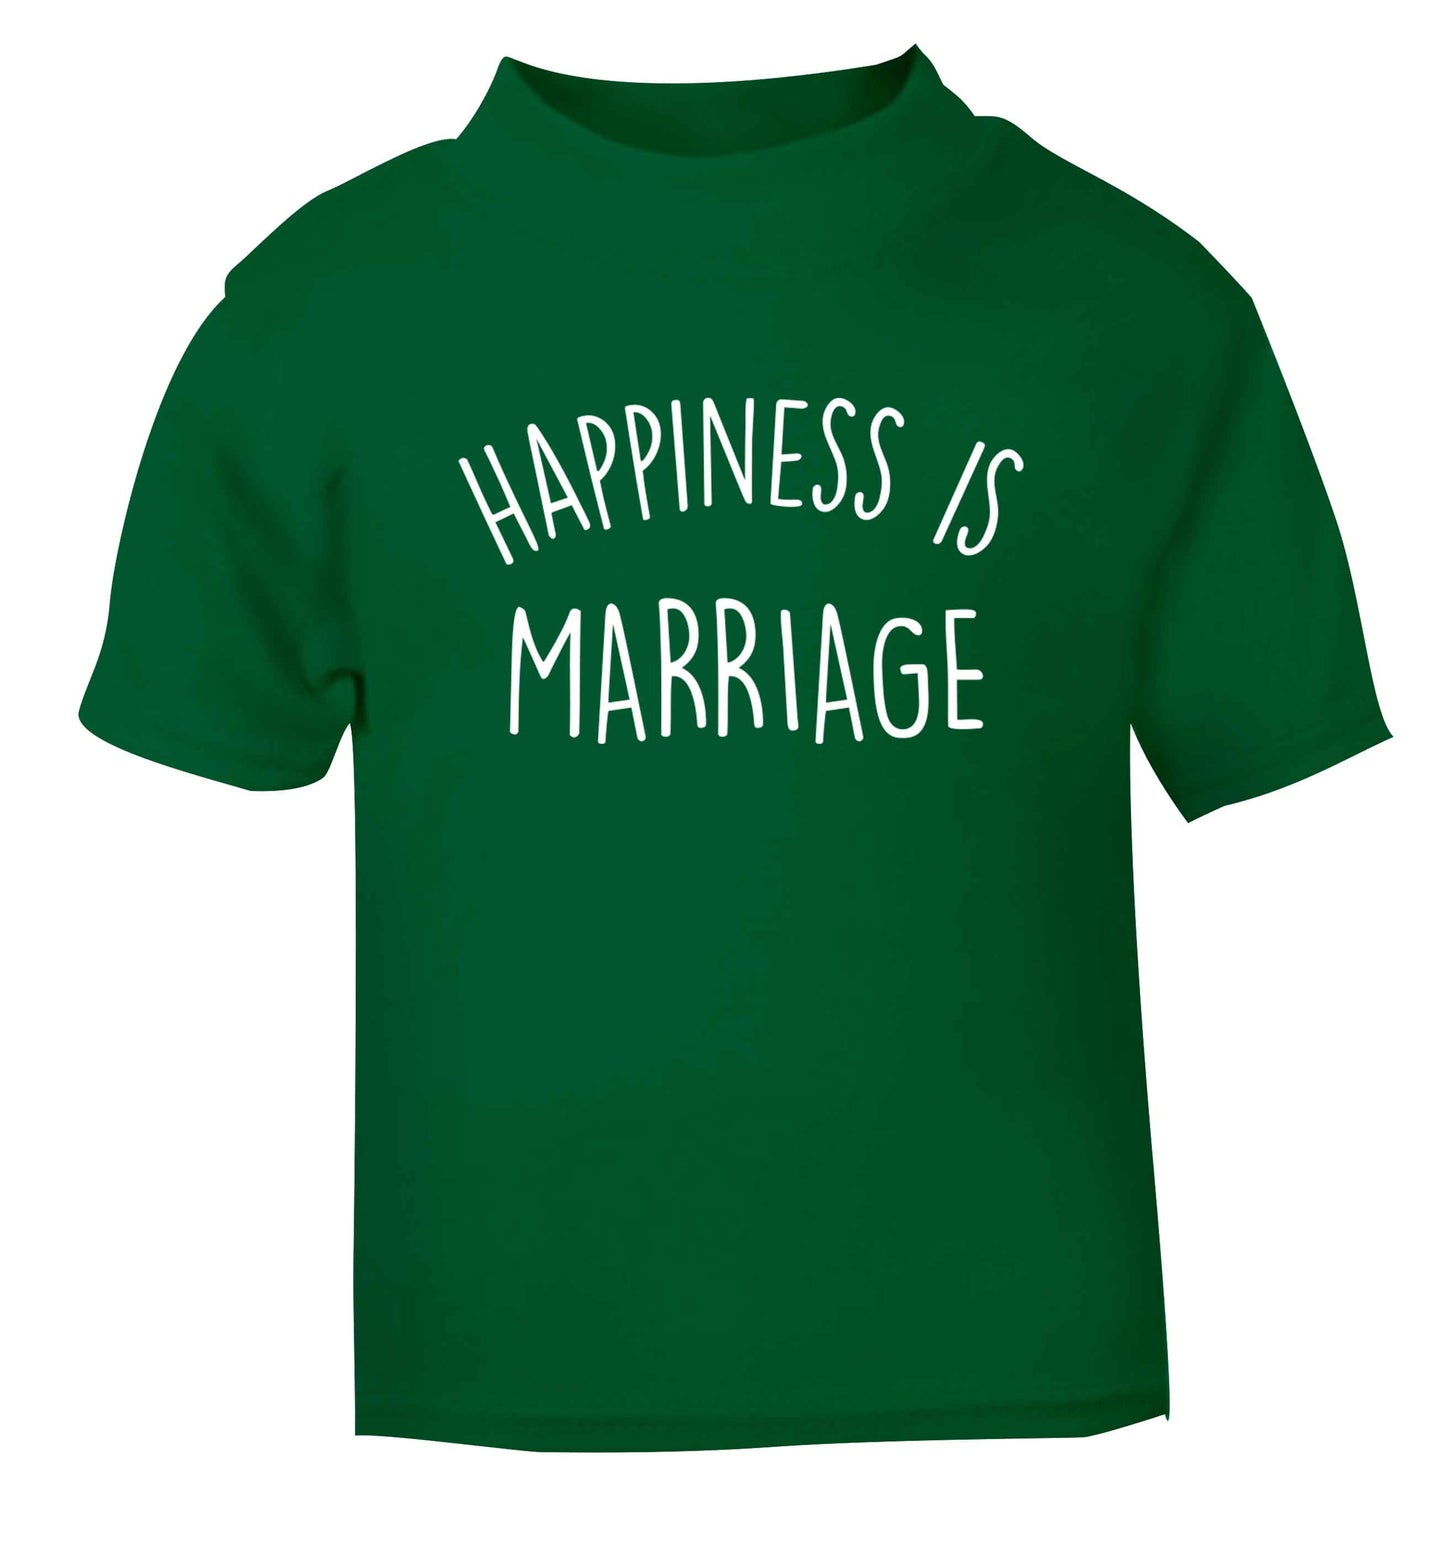 Happiness is wedding planning green baby toddler Tshirt 2 Years